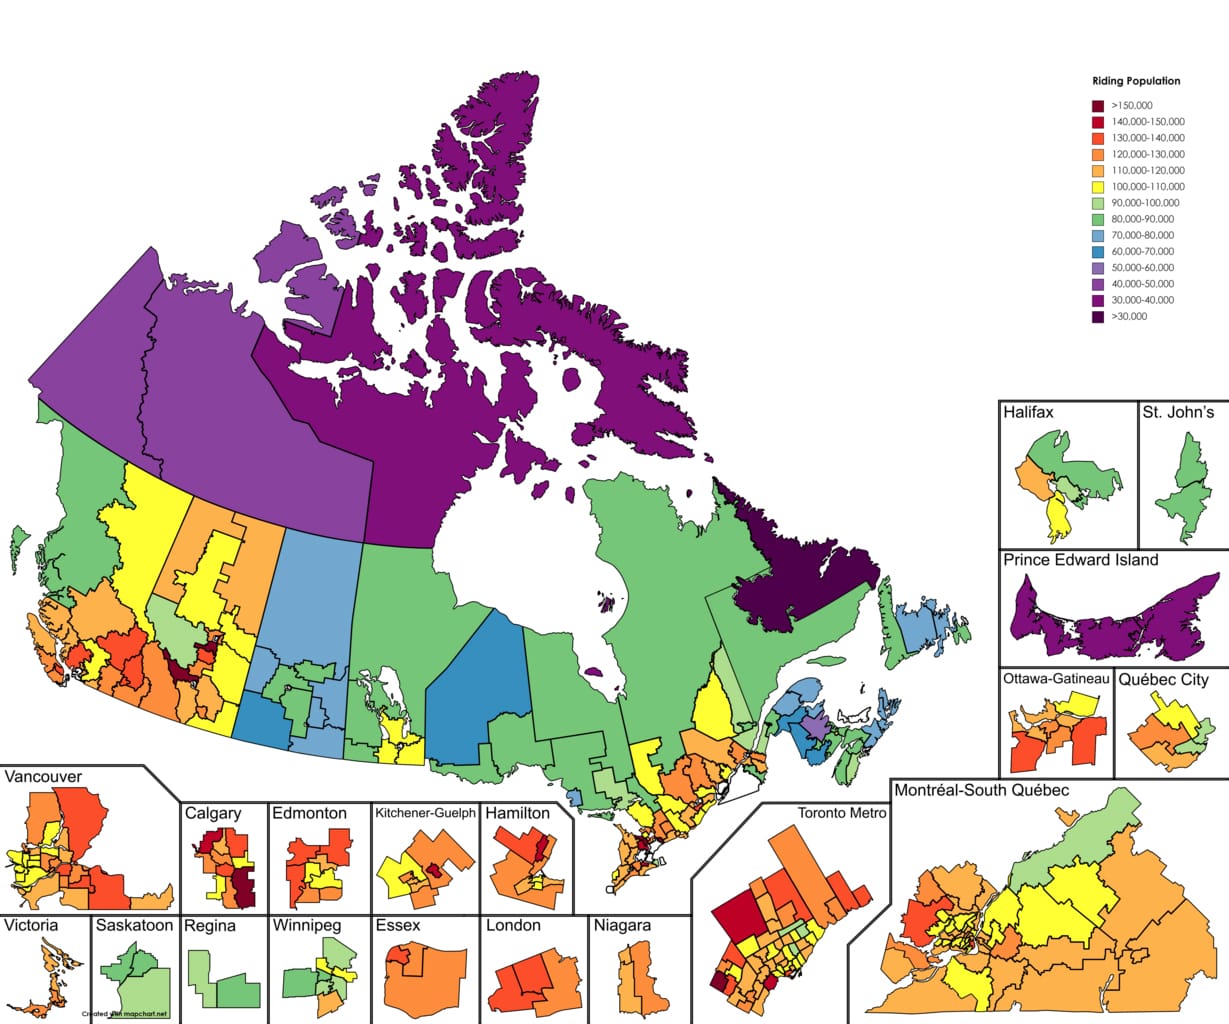 A map of Canada, subdivided into ridings that are color coded to correspond to population